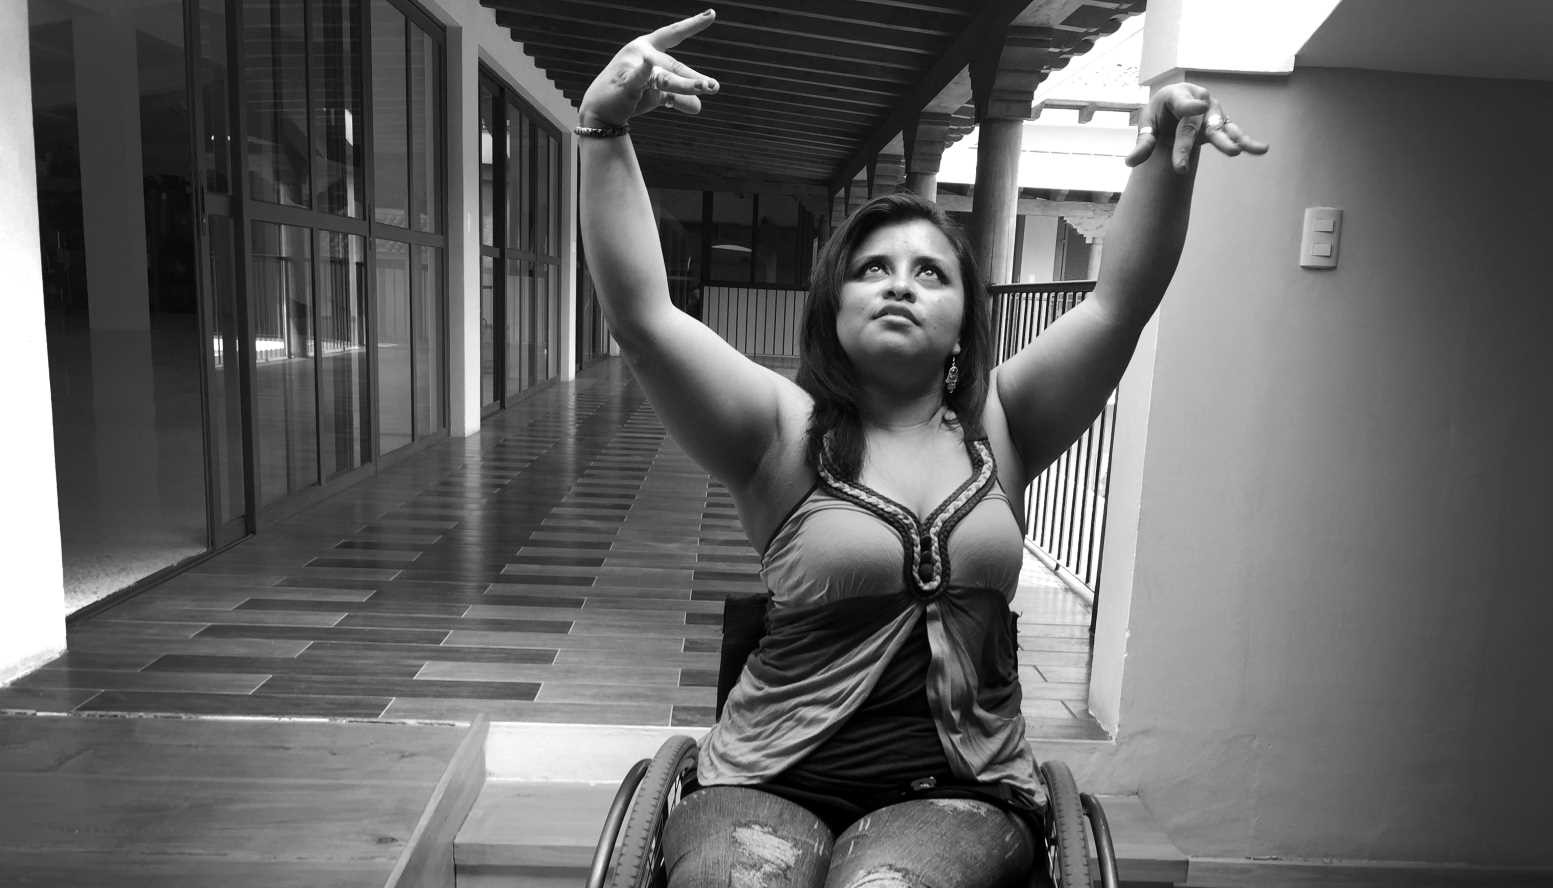 The exhibition “Silent Tears” gives women with disabilities a voice: Jacky from Guatemala “dances” in her wheelchair.